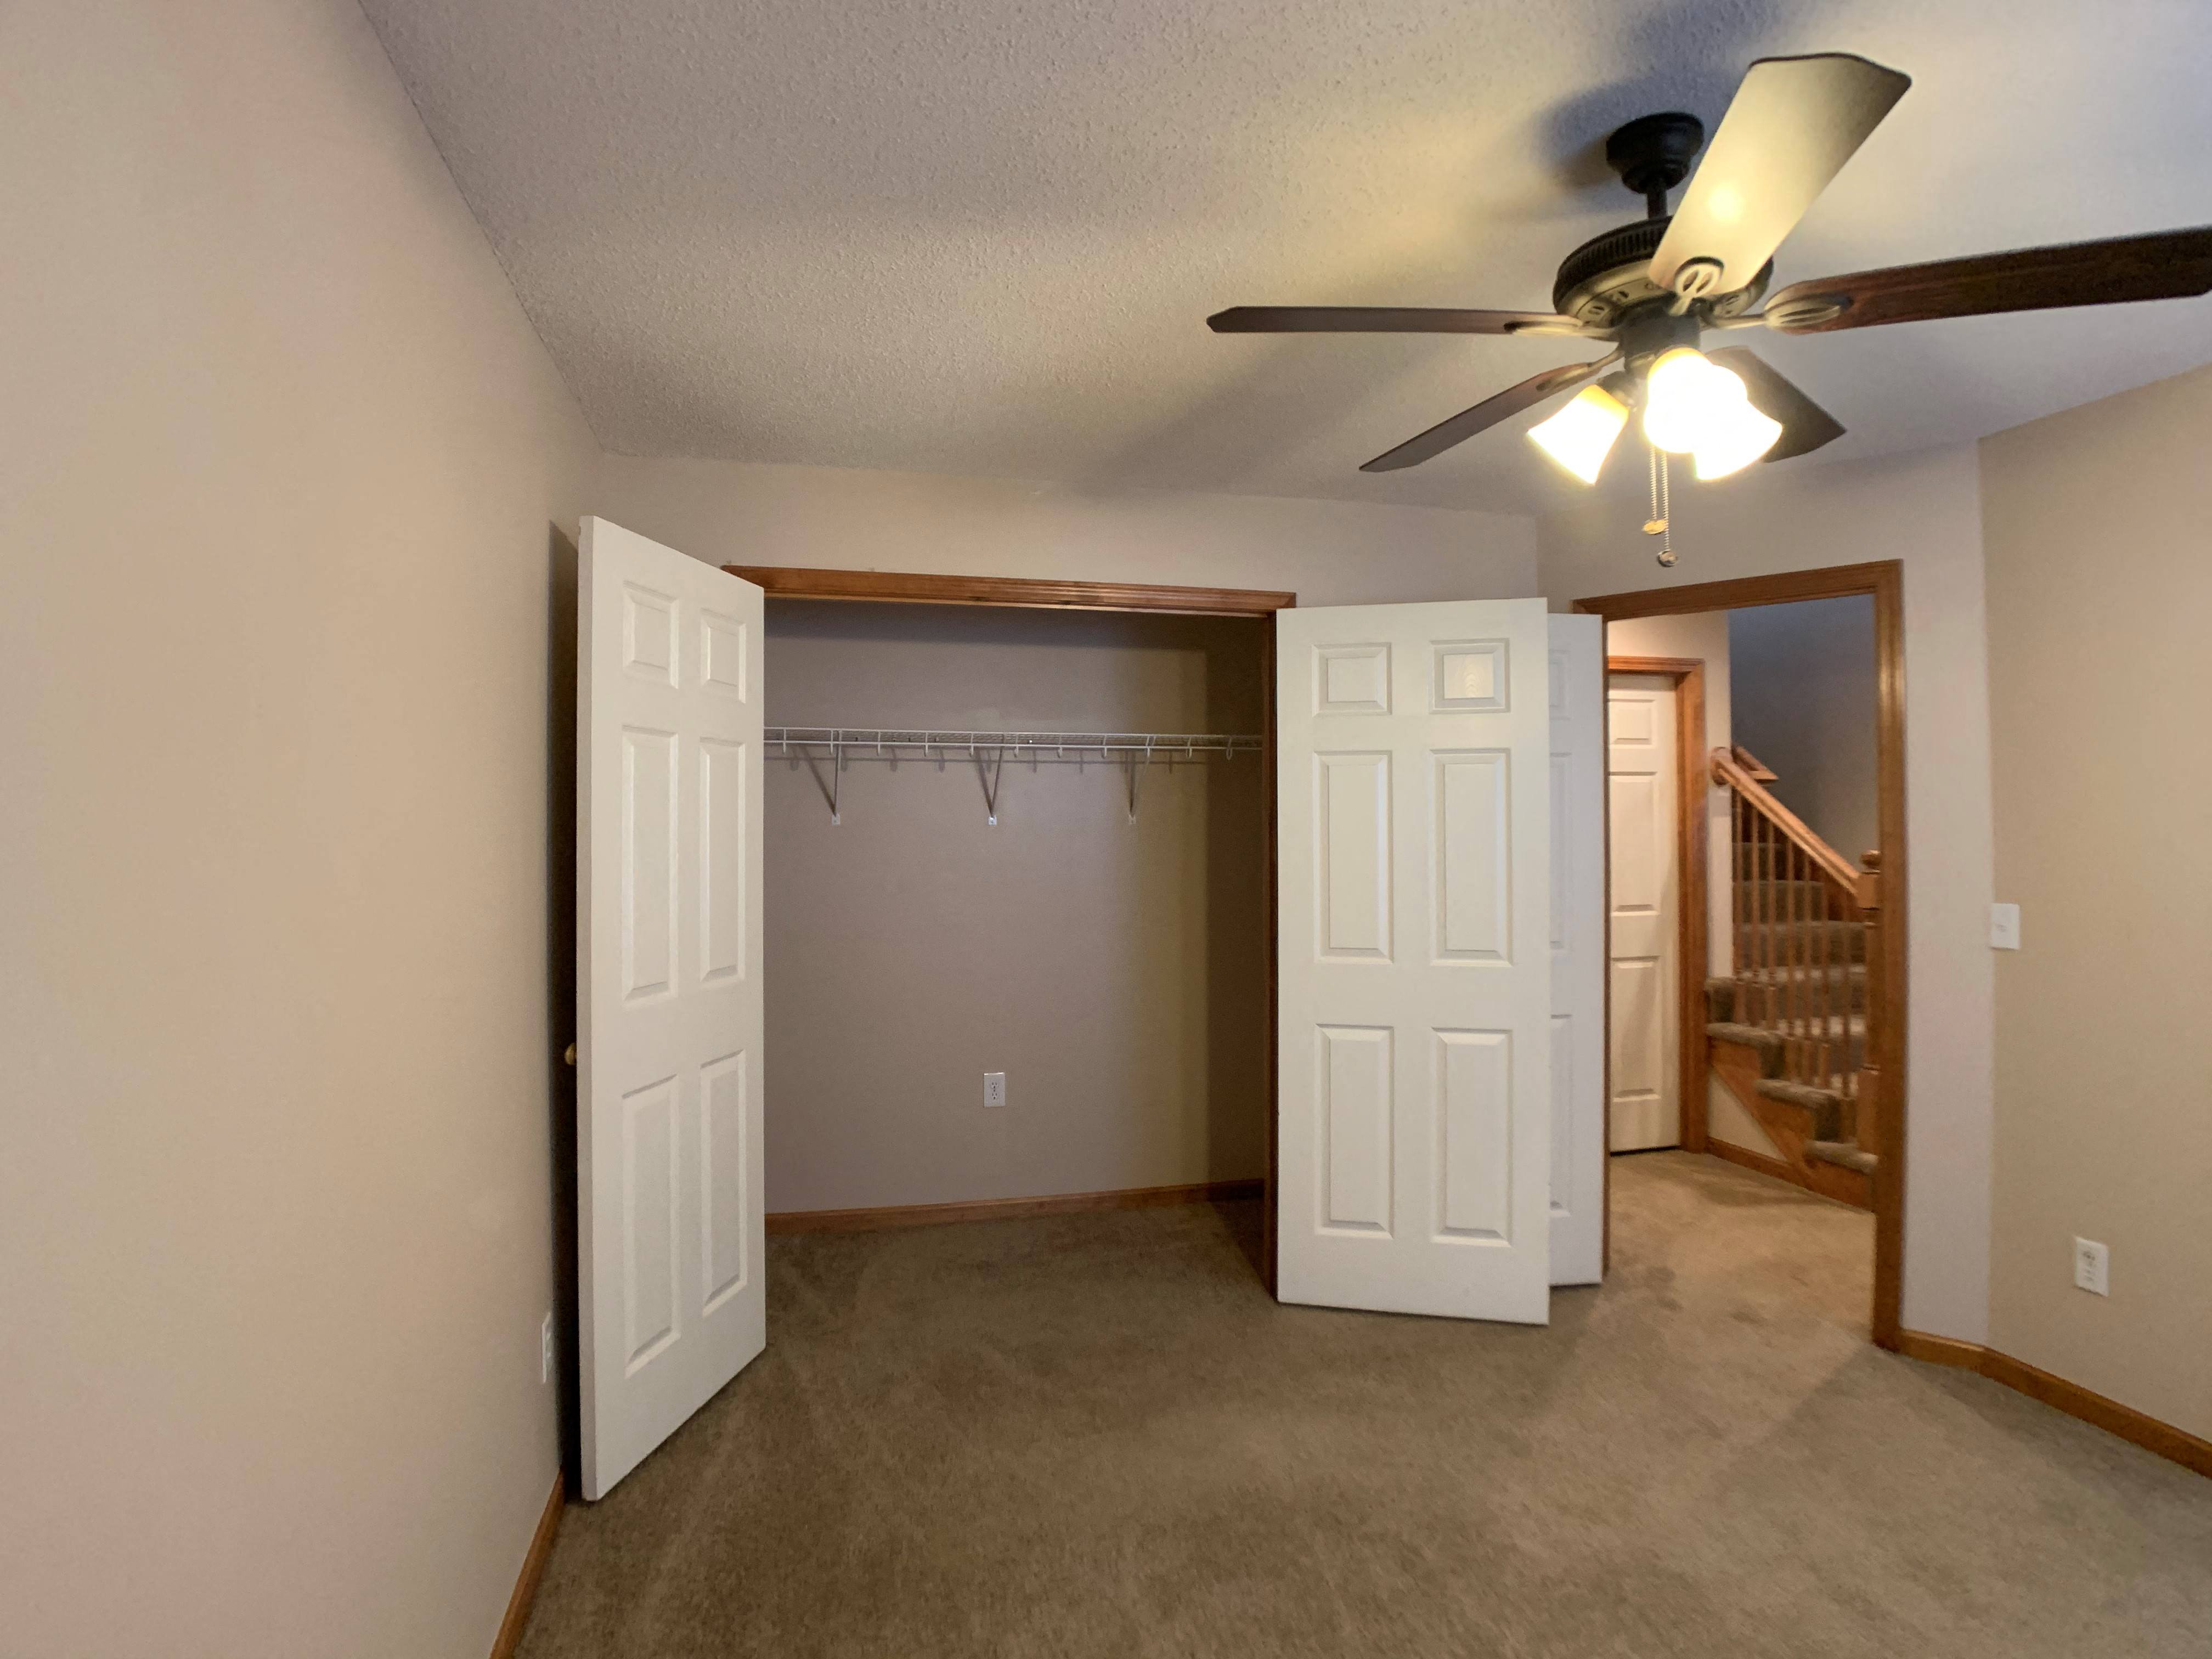 Second bedroom with large closet and doorway